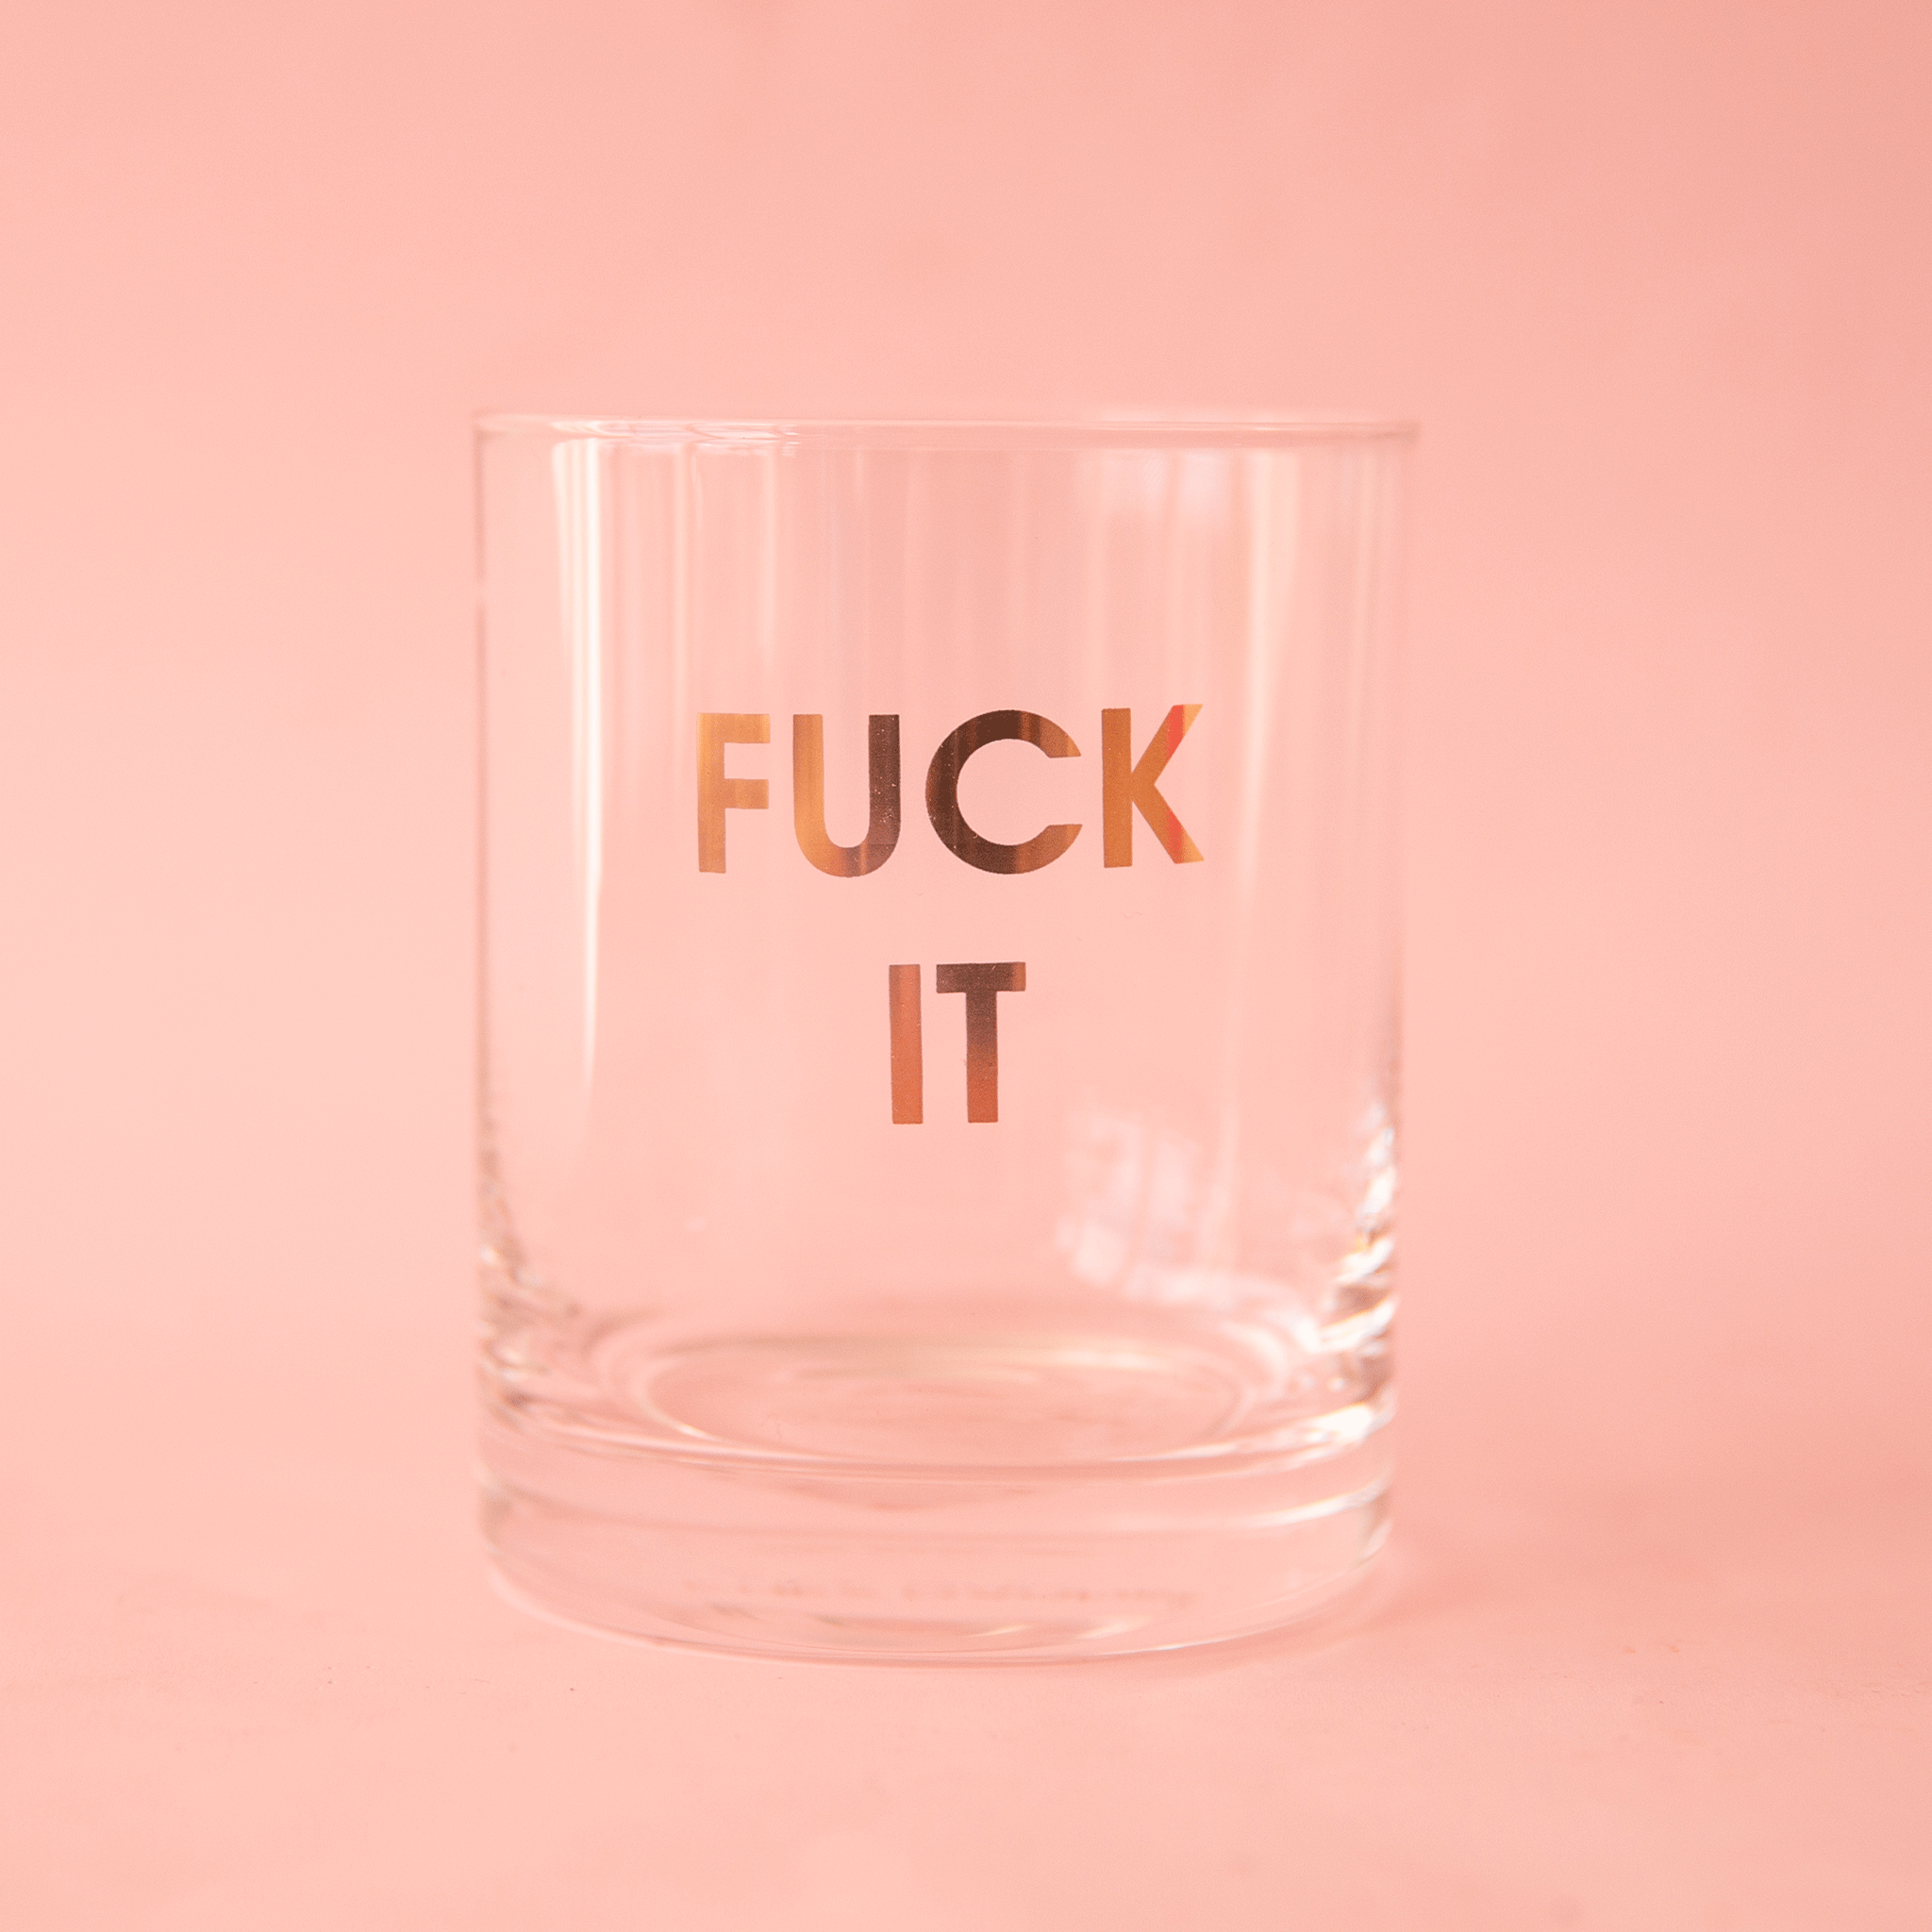 On a pink background is a clear glass mug with gold text across the front that reads, "Fuck It".